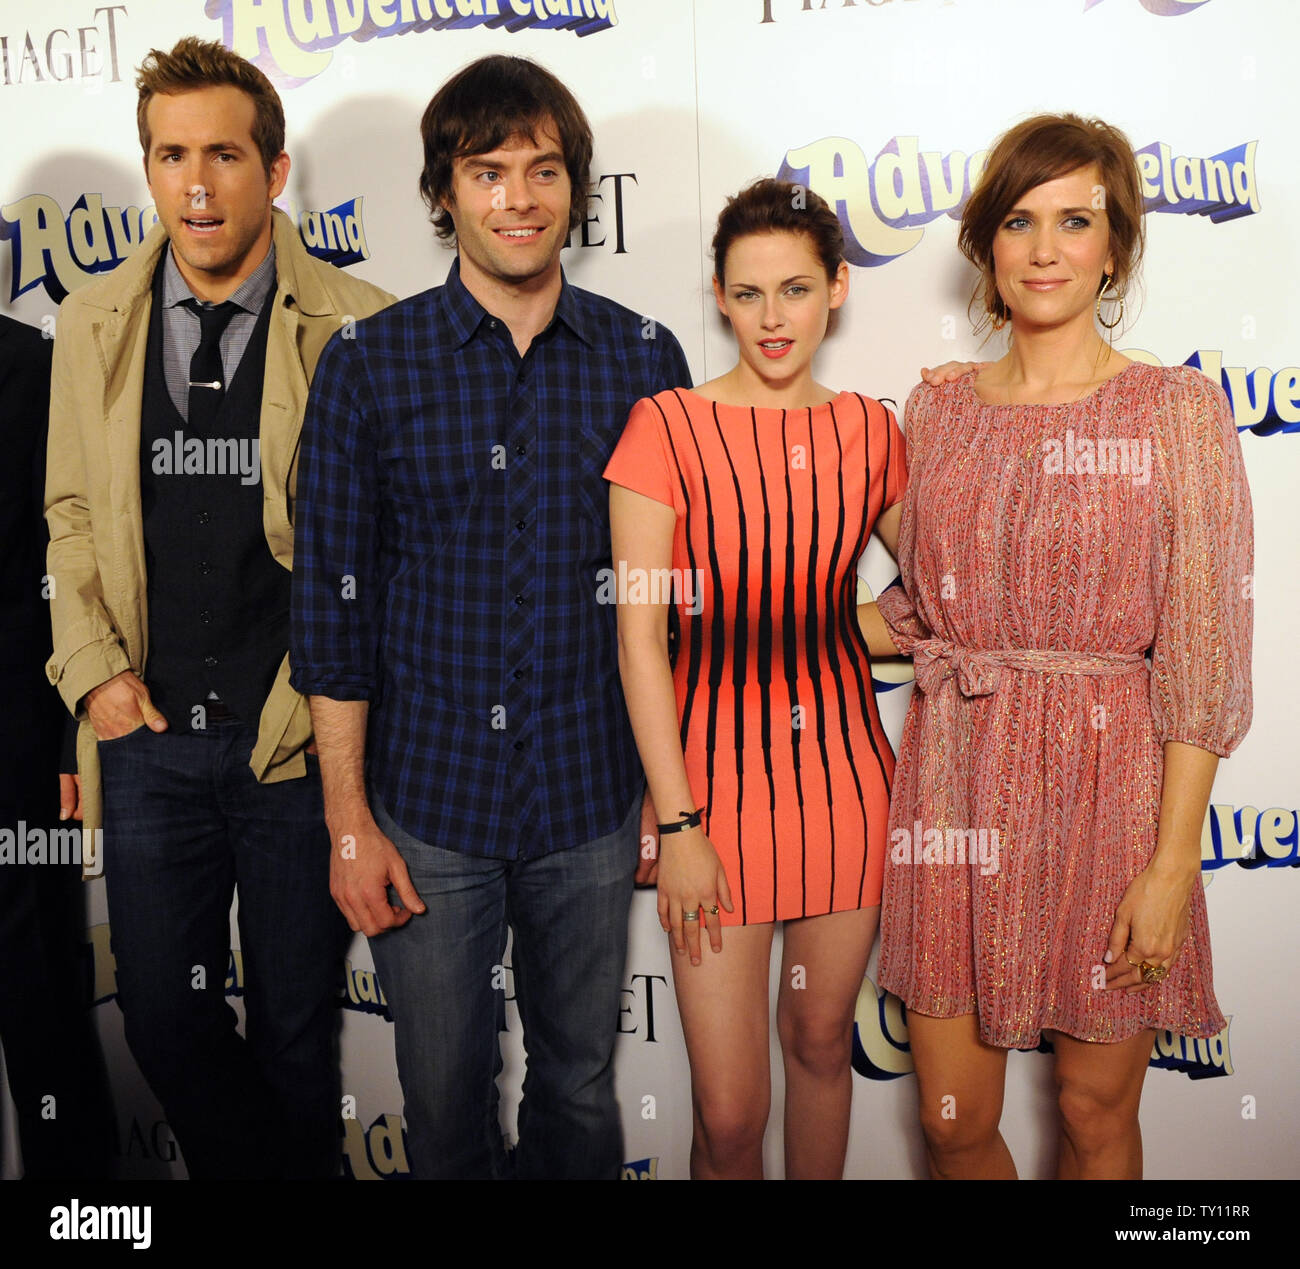 Cast members Ryan Reynolds, Bill Hader, Kristen Stewart and Kristen Wiig (L-R) attend the premiere of the motion picture comedy 'Adventureland' in Los Angeles on March 16, 2009.  (UPI Photo/Jim Ruymen) Stock Photo